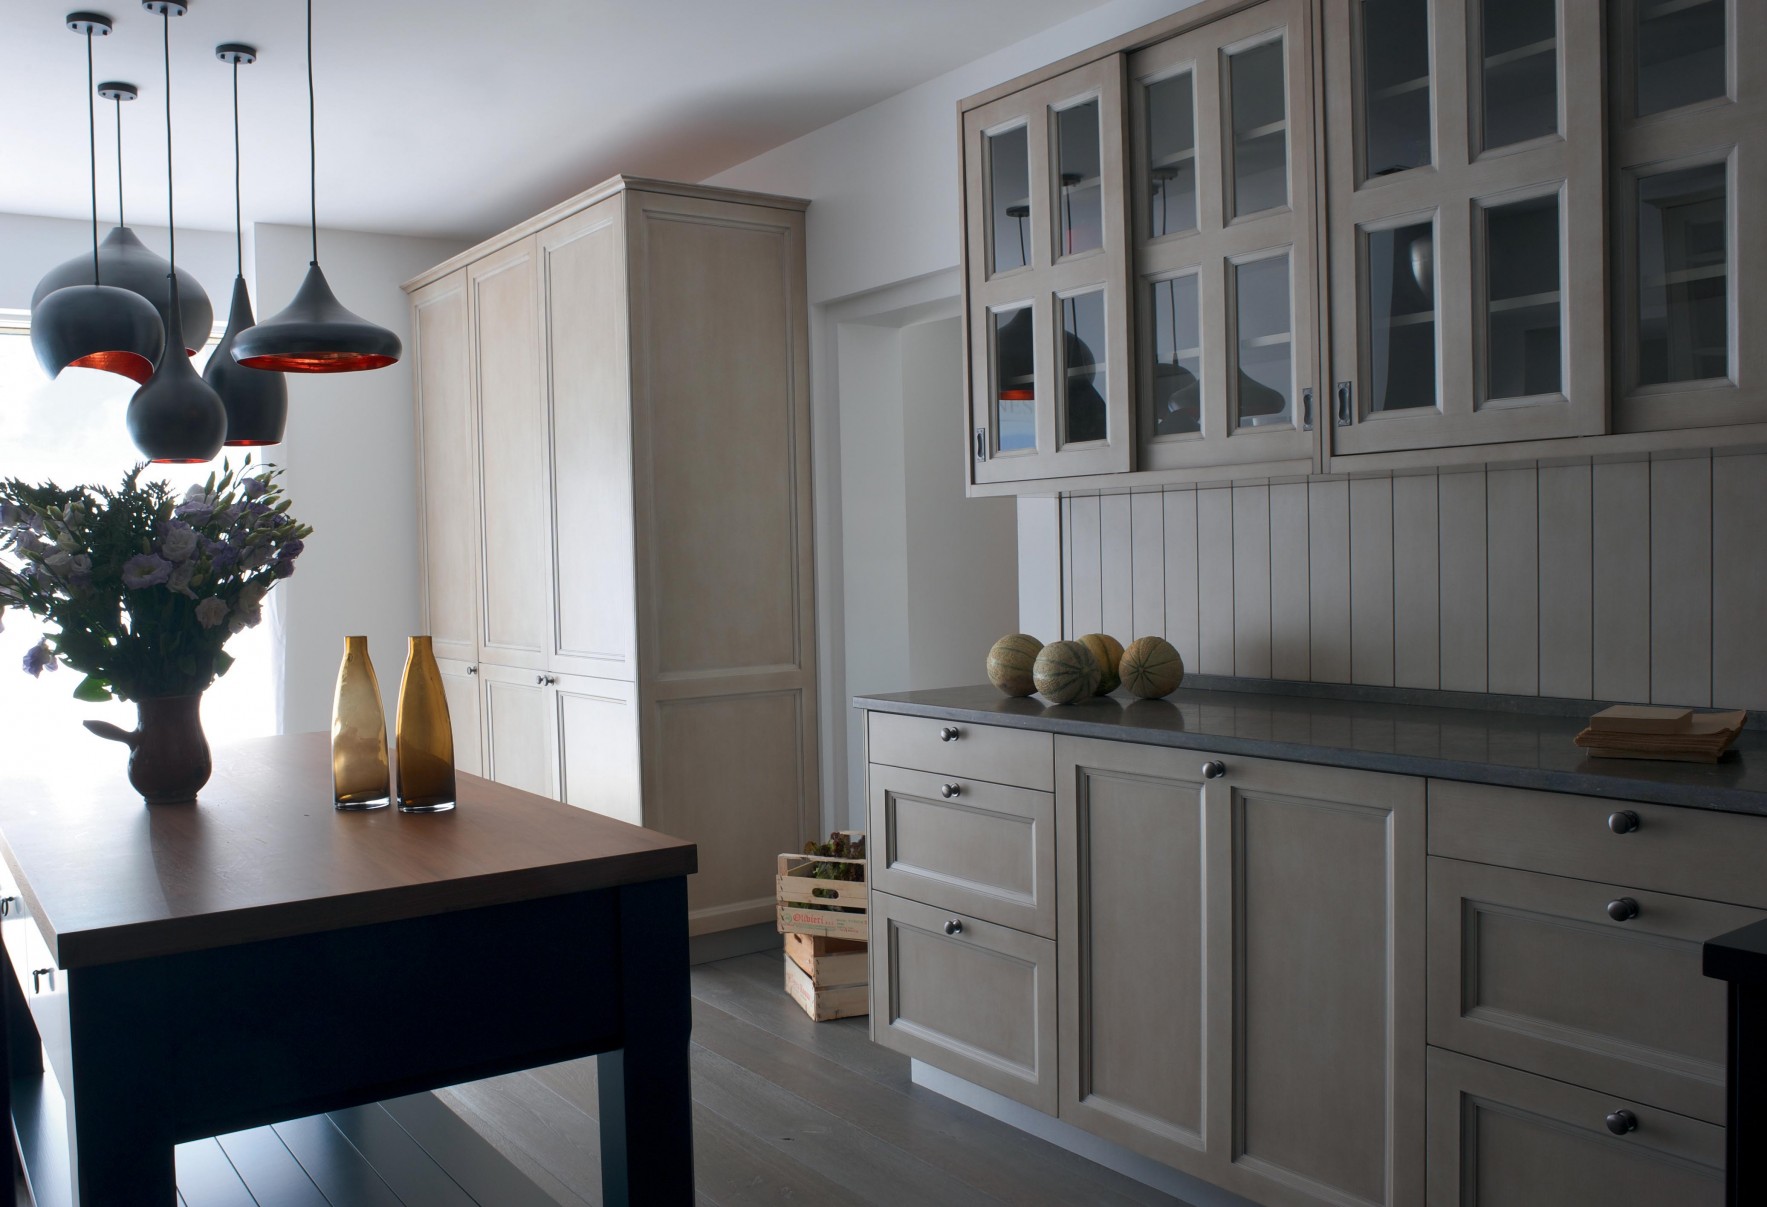 Classic kitchen built in the tradition of fine French cabinetmaking